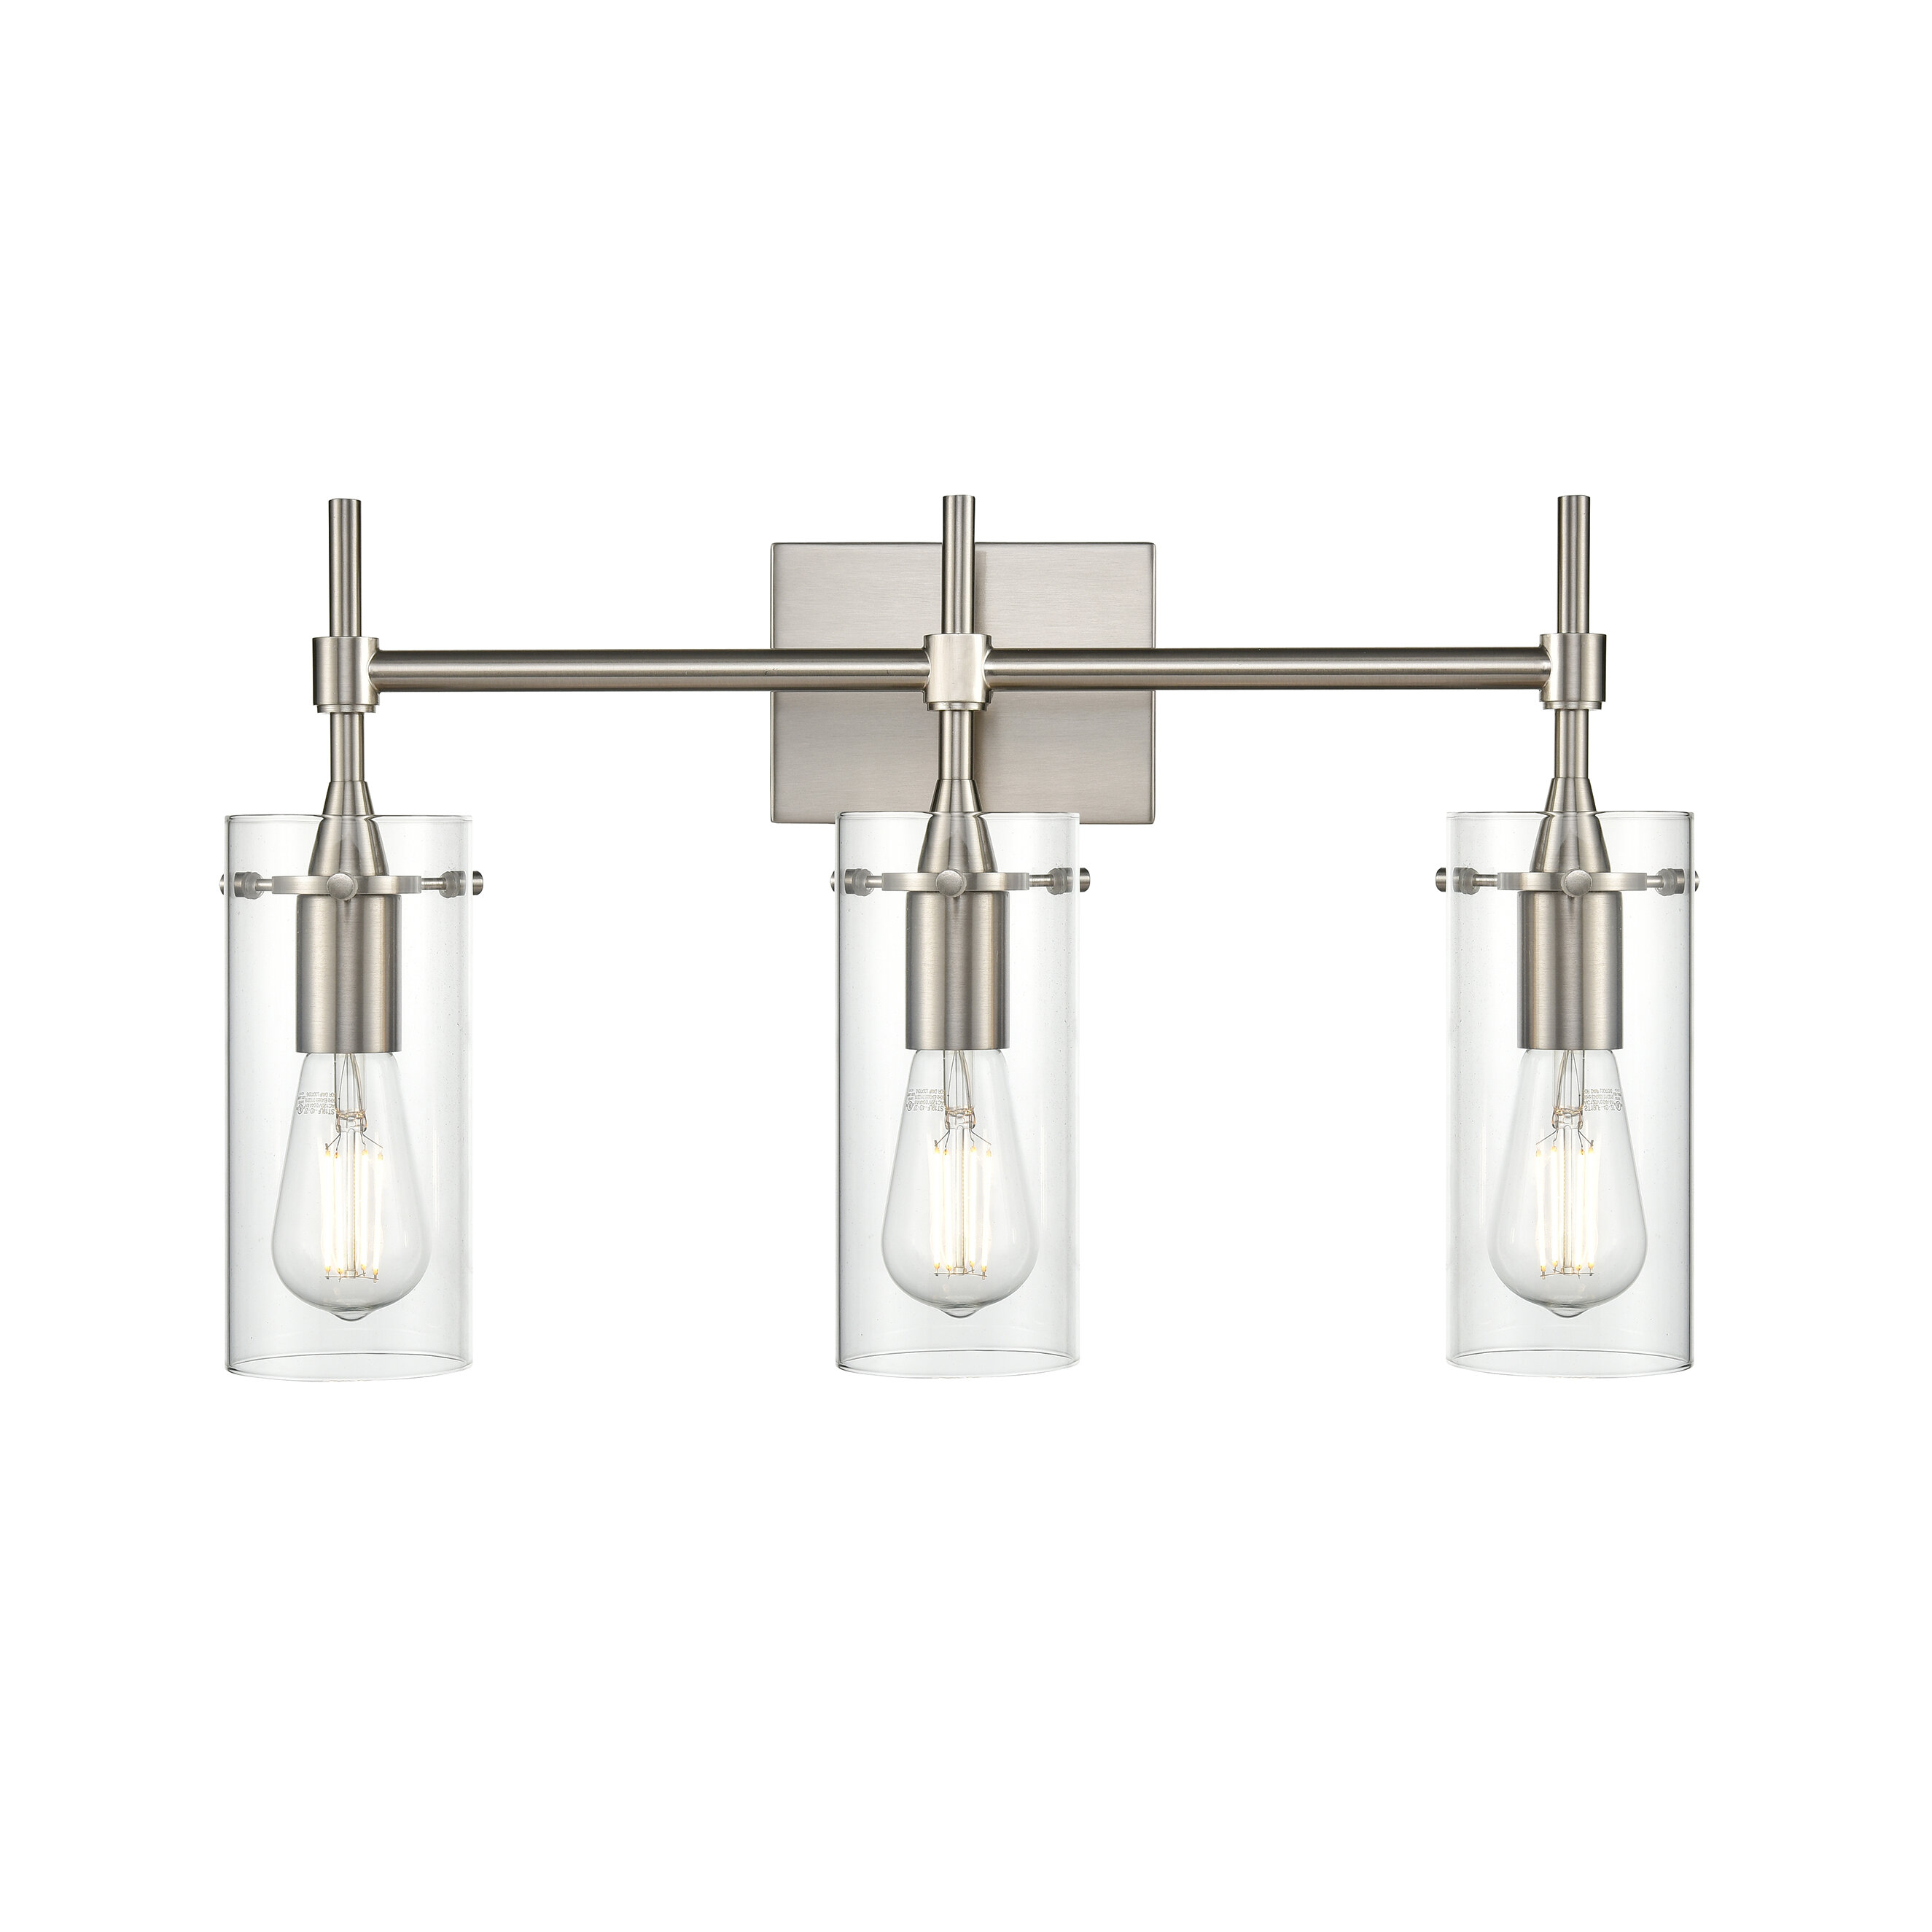 New 2 light Brushed Nickel vanity bathroom light with clear wavy bell glass* 